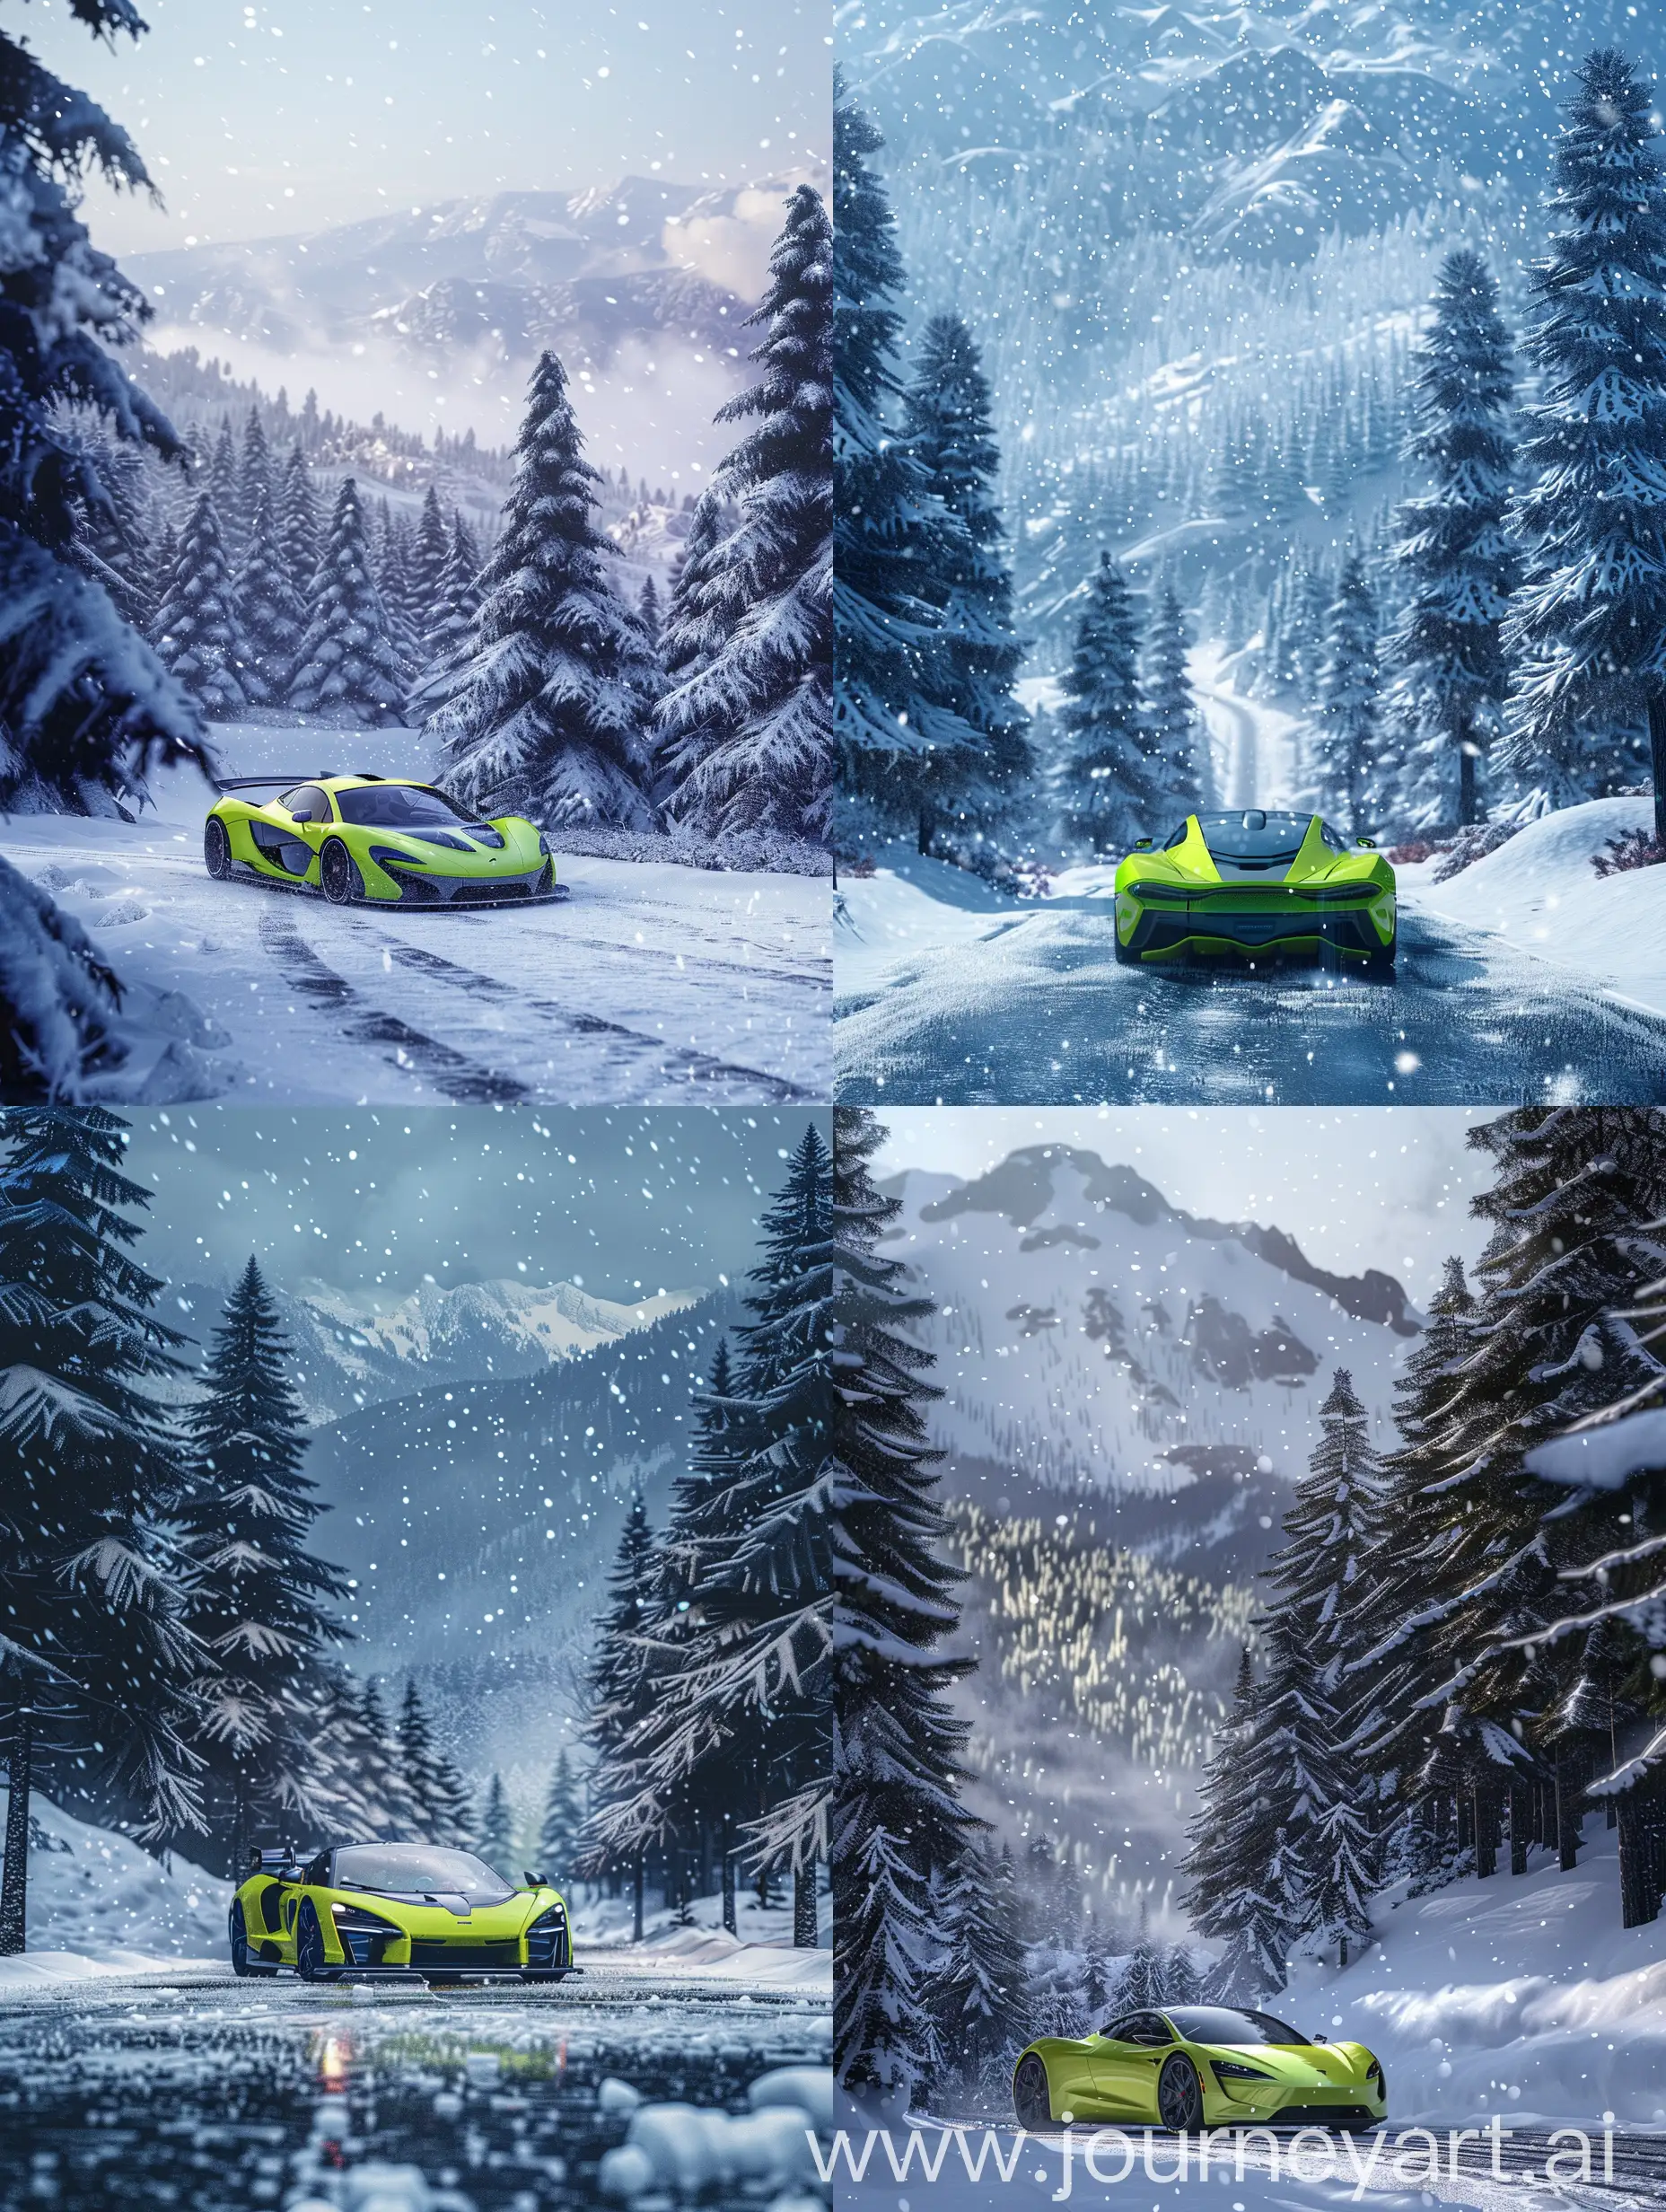 Hyperrealistic photo, anime b
ackground with snow on the forest and pine trees and an electric bright green super c
ar located in the mountains, a photo taken on a winter day, there is snow everywhere and it is snowing, 4k all in beautiful anime 

